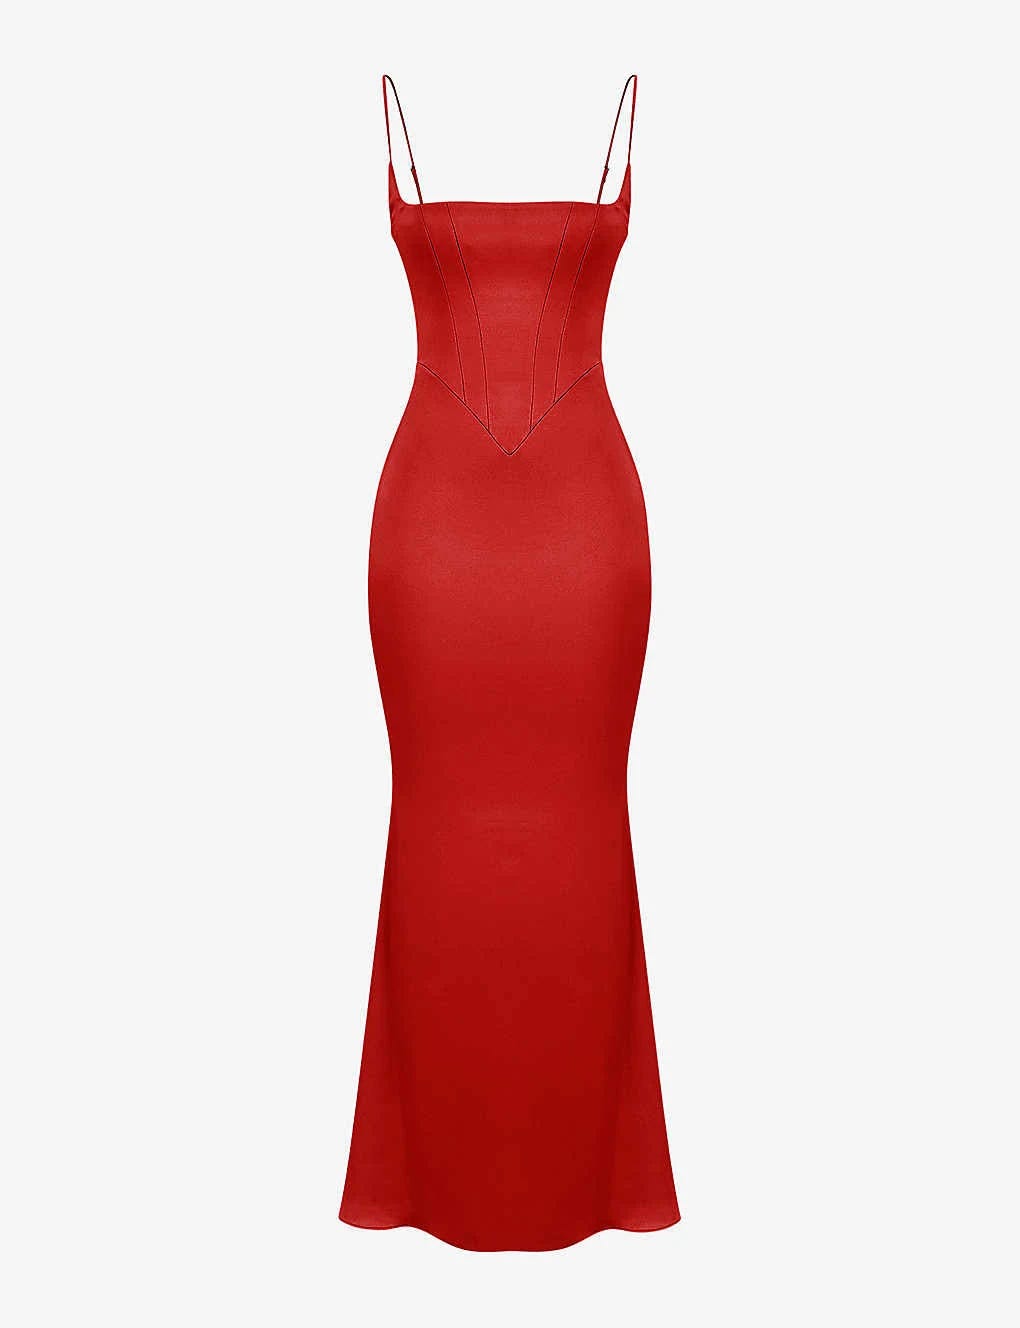 Stylish Corset Top Maxi Dress in Red Rose | Image